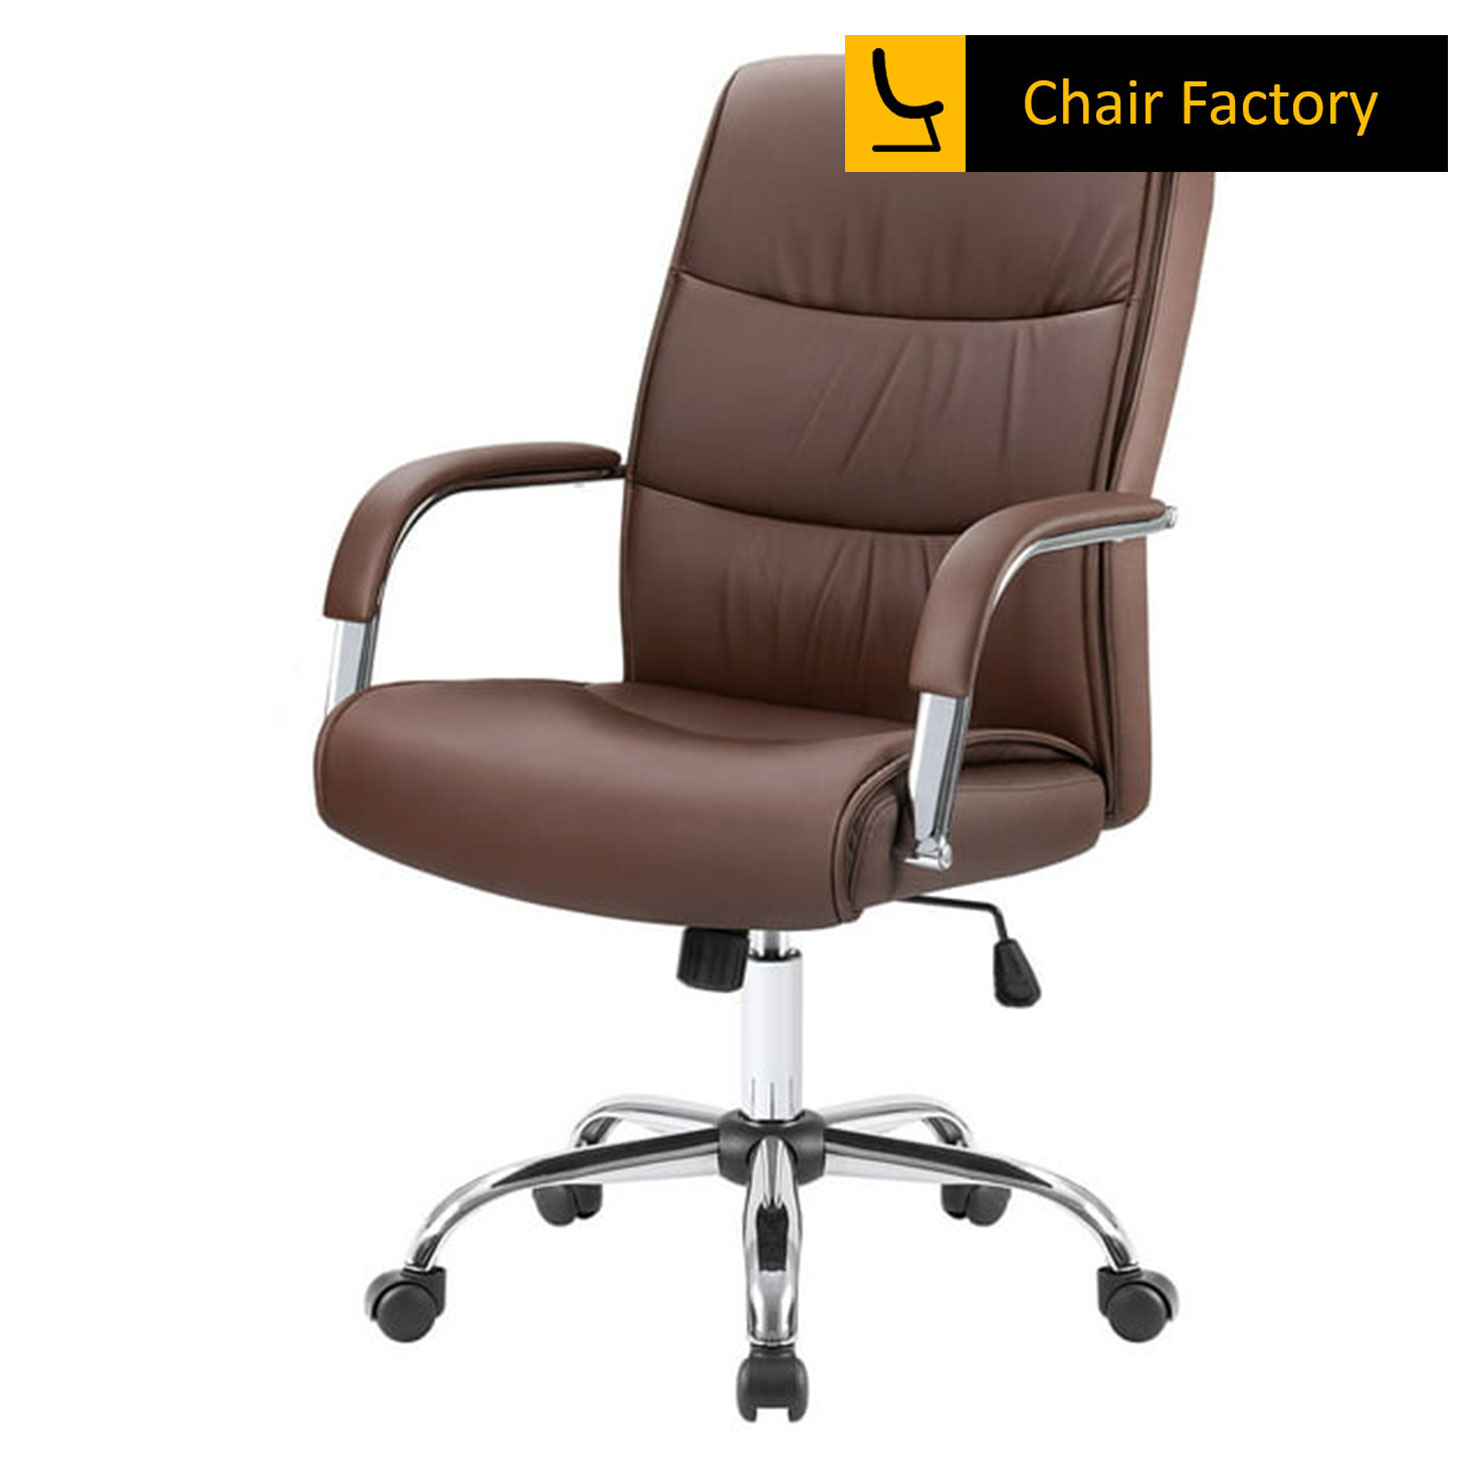 BAREND leather high back chair